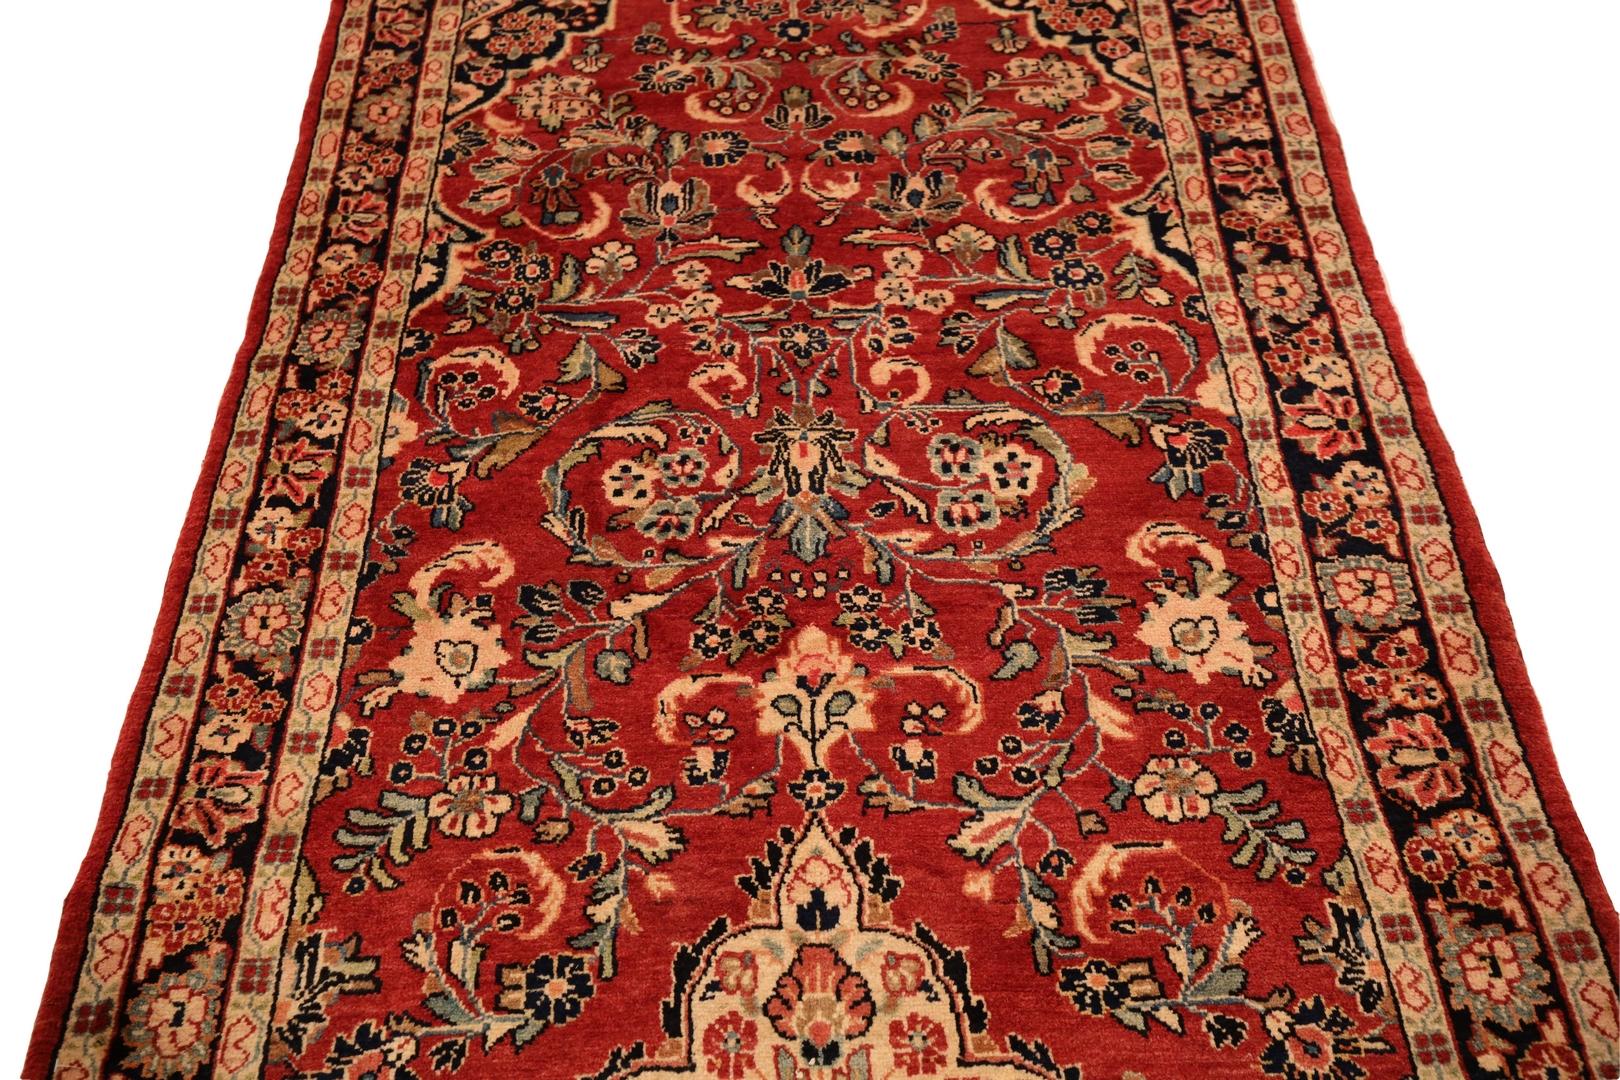 Hand-Knotted Mahal Semi-Antique Runner - 4'6